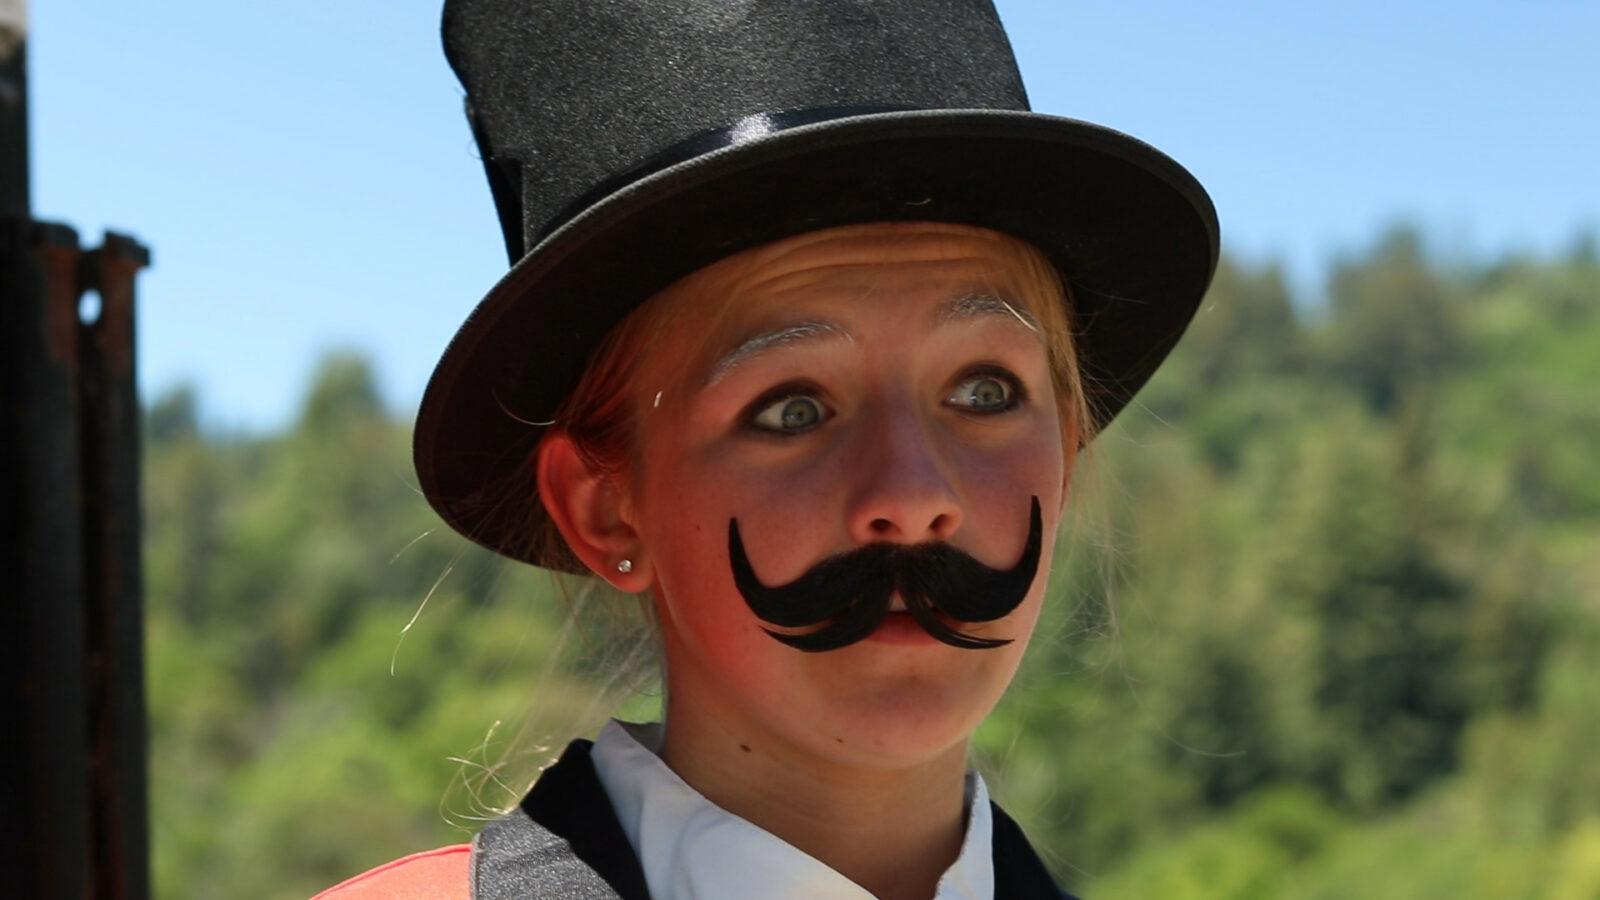 A girl with a top hat and mustache on.